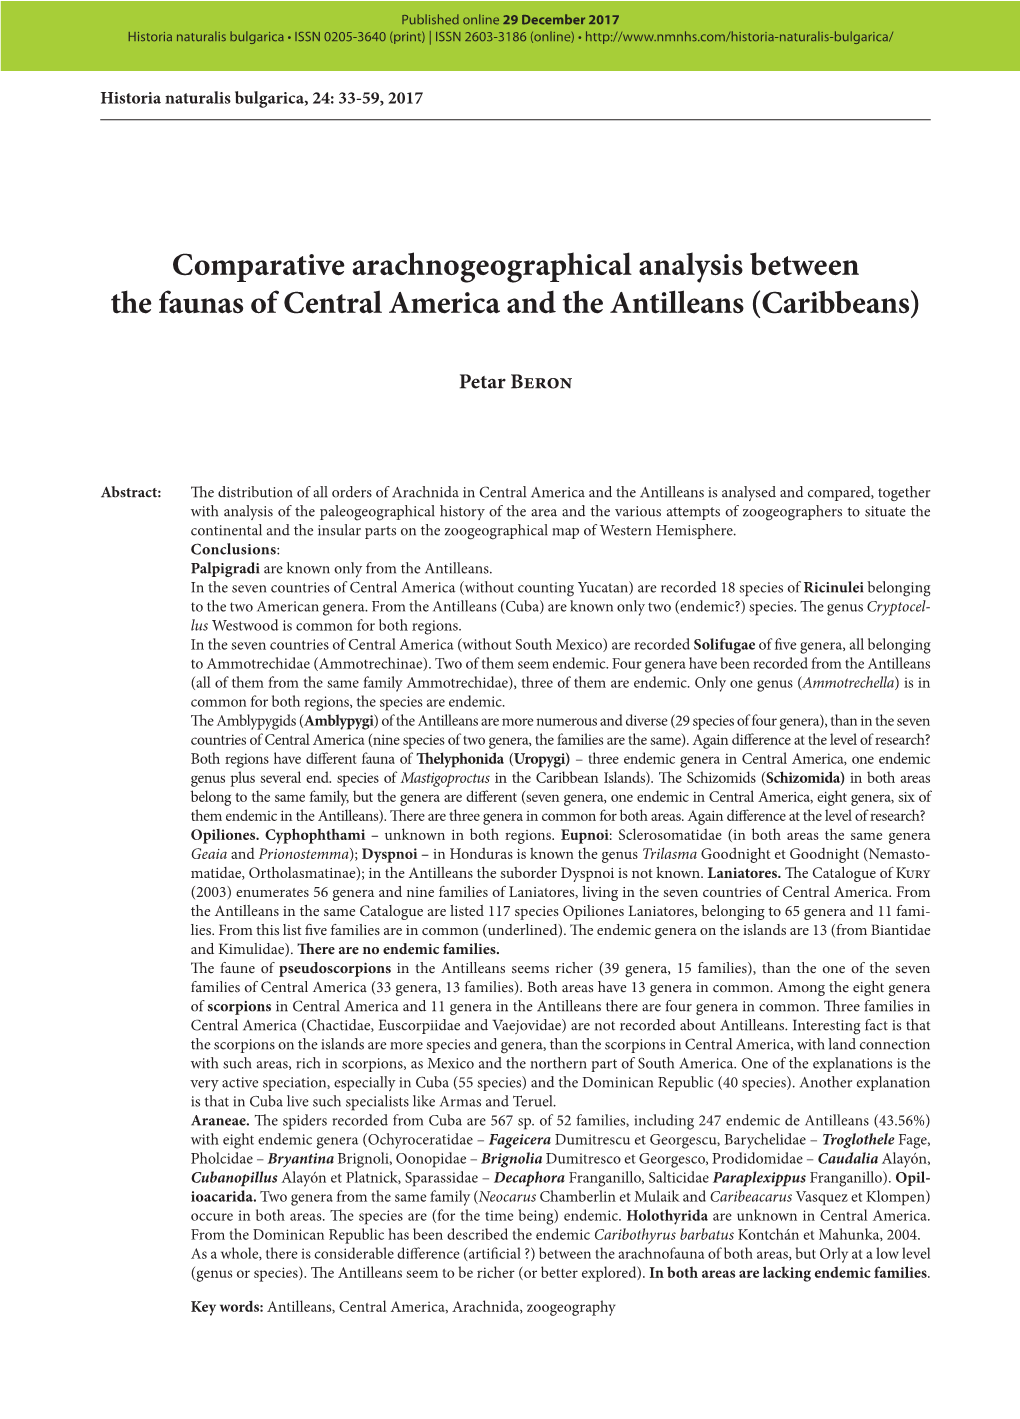 Comparative Arachnogeographical Analysis Between the Faunas of Central America and the Antilleans (Caribbeans)